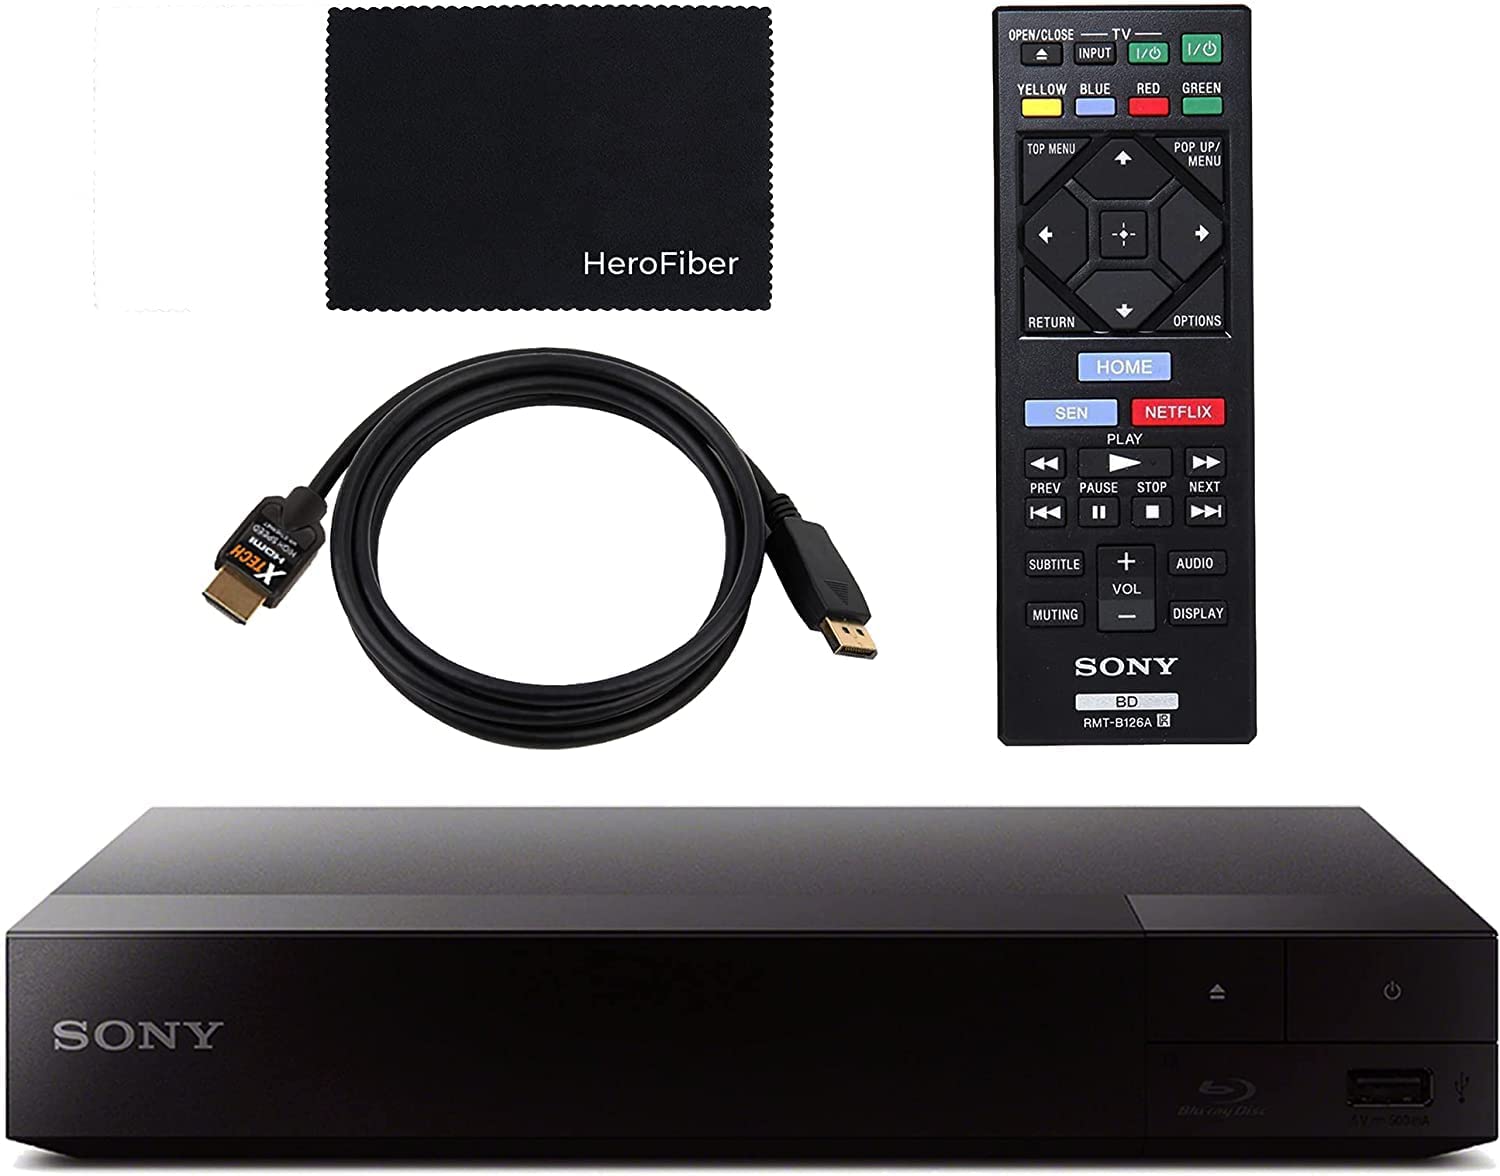 Sony Blu Ray Player BDP BX370 with WiFi for Video Streaming and Screen Mirroring | Full HD Bluray Playback, DVD Upscaling | Includes Blue Ray DVD Player, Remote Control, HDMI Cable, and Cleaning Cloth